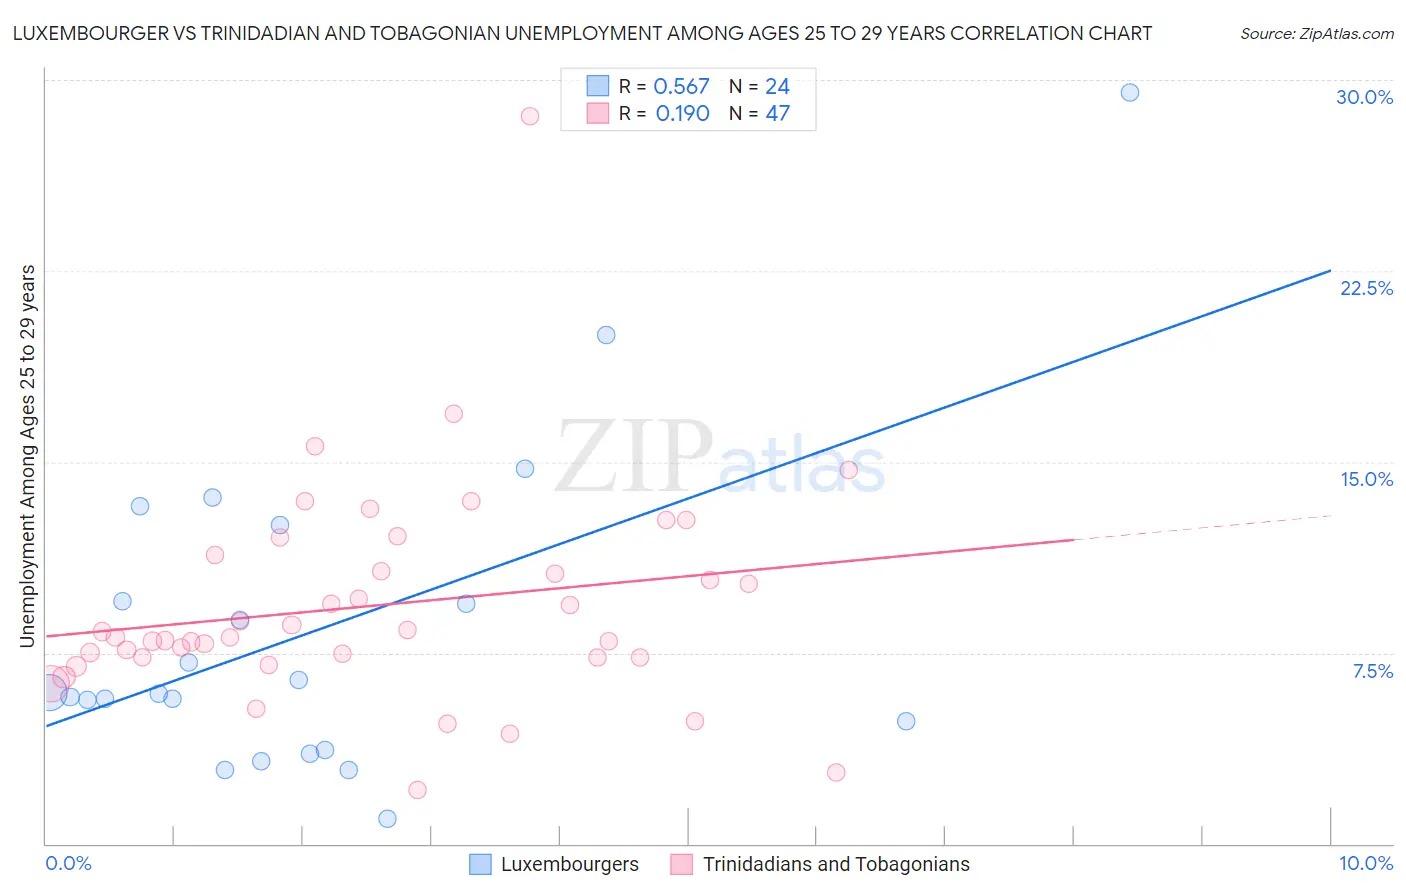 Luxembourger vs Trinidadian and Tobagonian Unemployment Among Ages 25 to 29 years